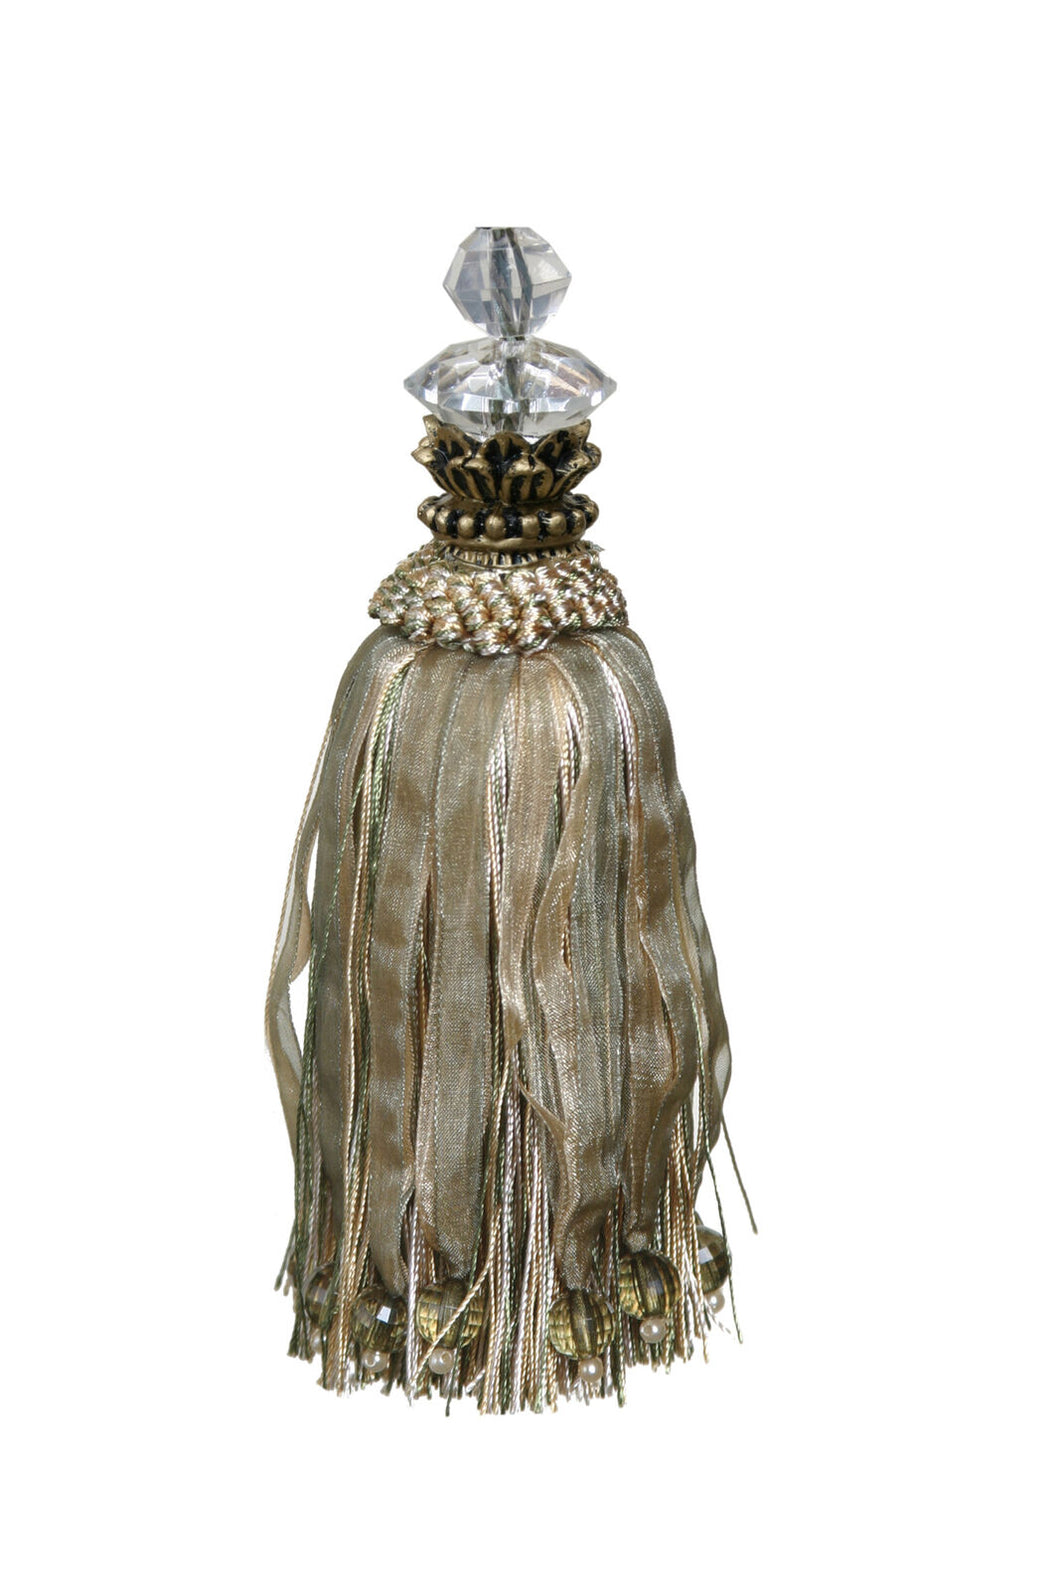 Large Tassel with Glass Bead in Tulip Top - Light Green / Gold - Decorative Tassel for Antique Key or Door BGGT01